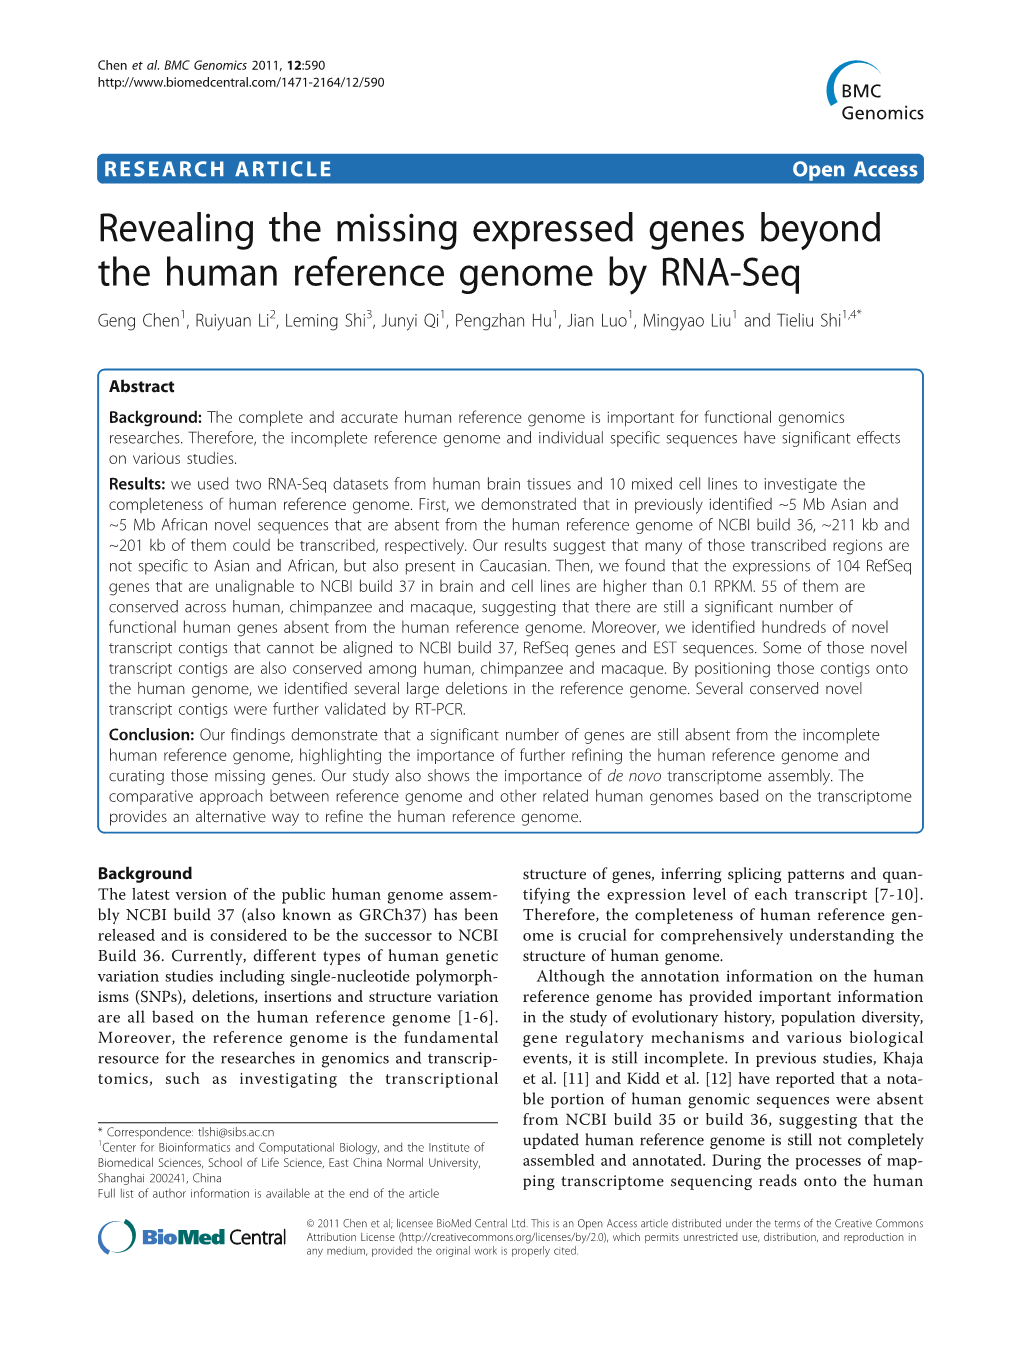 Revealing the Missing Expressed Genes Beyond the Human Reference